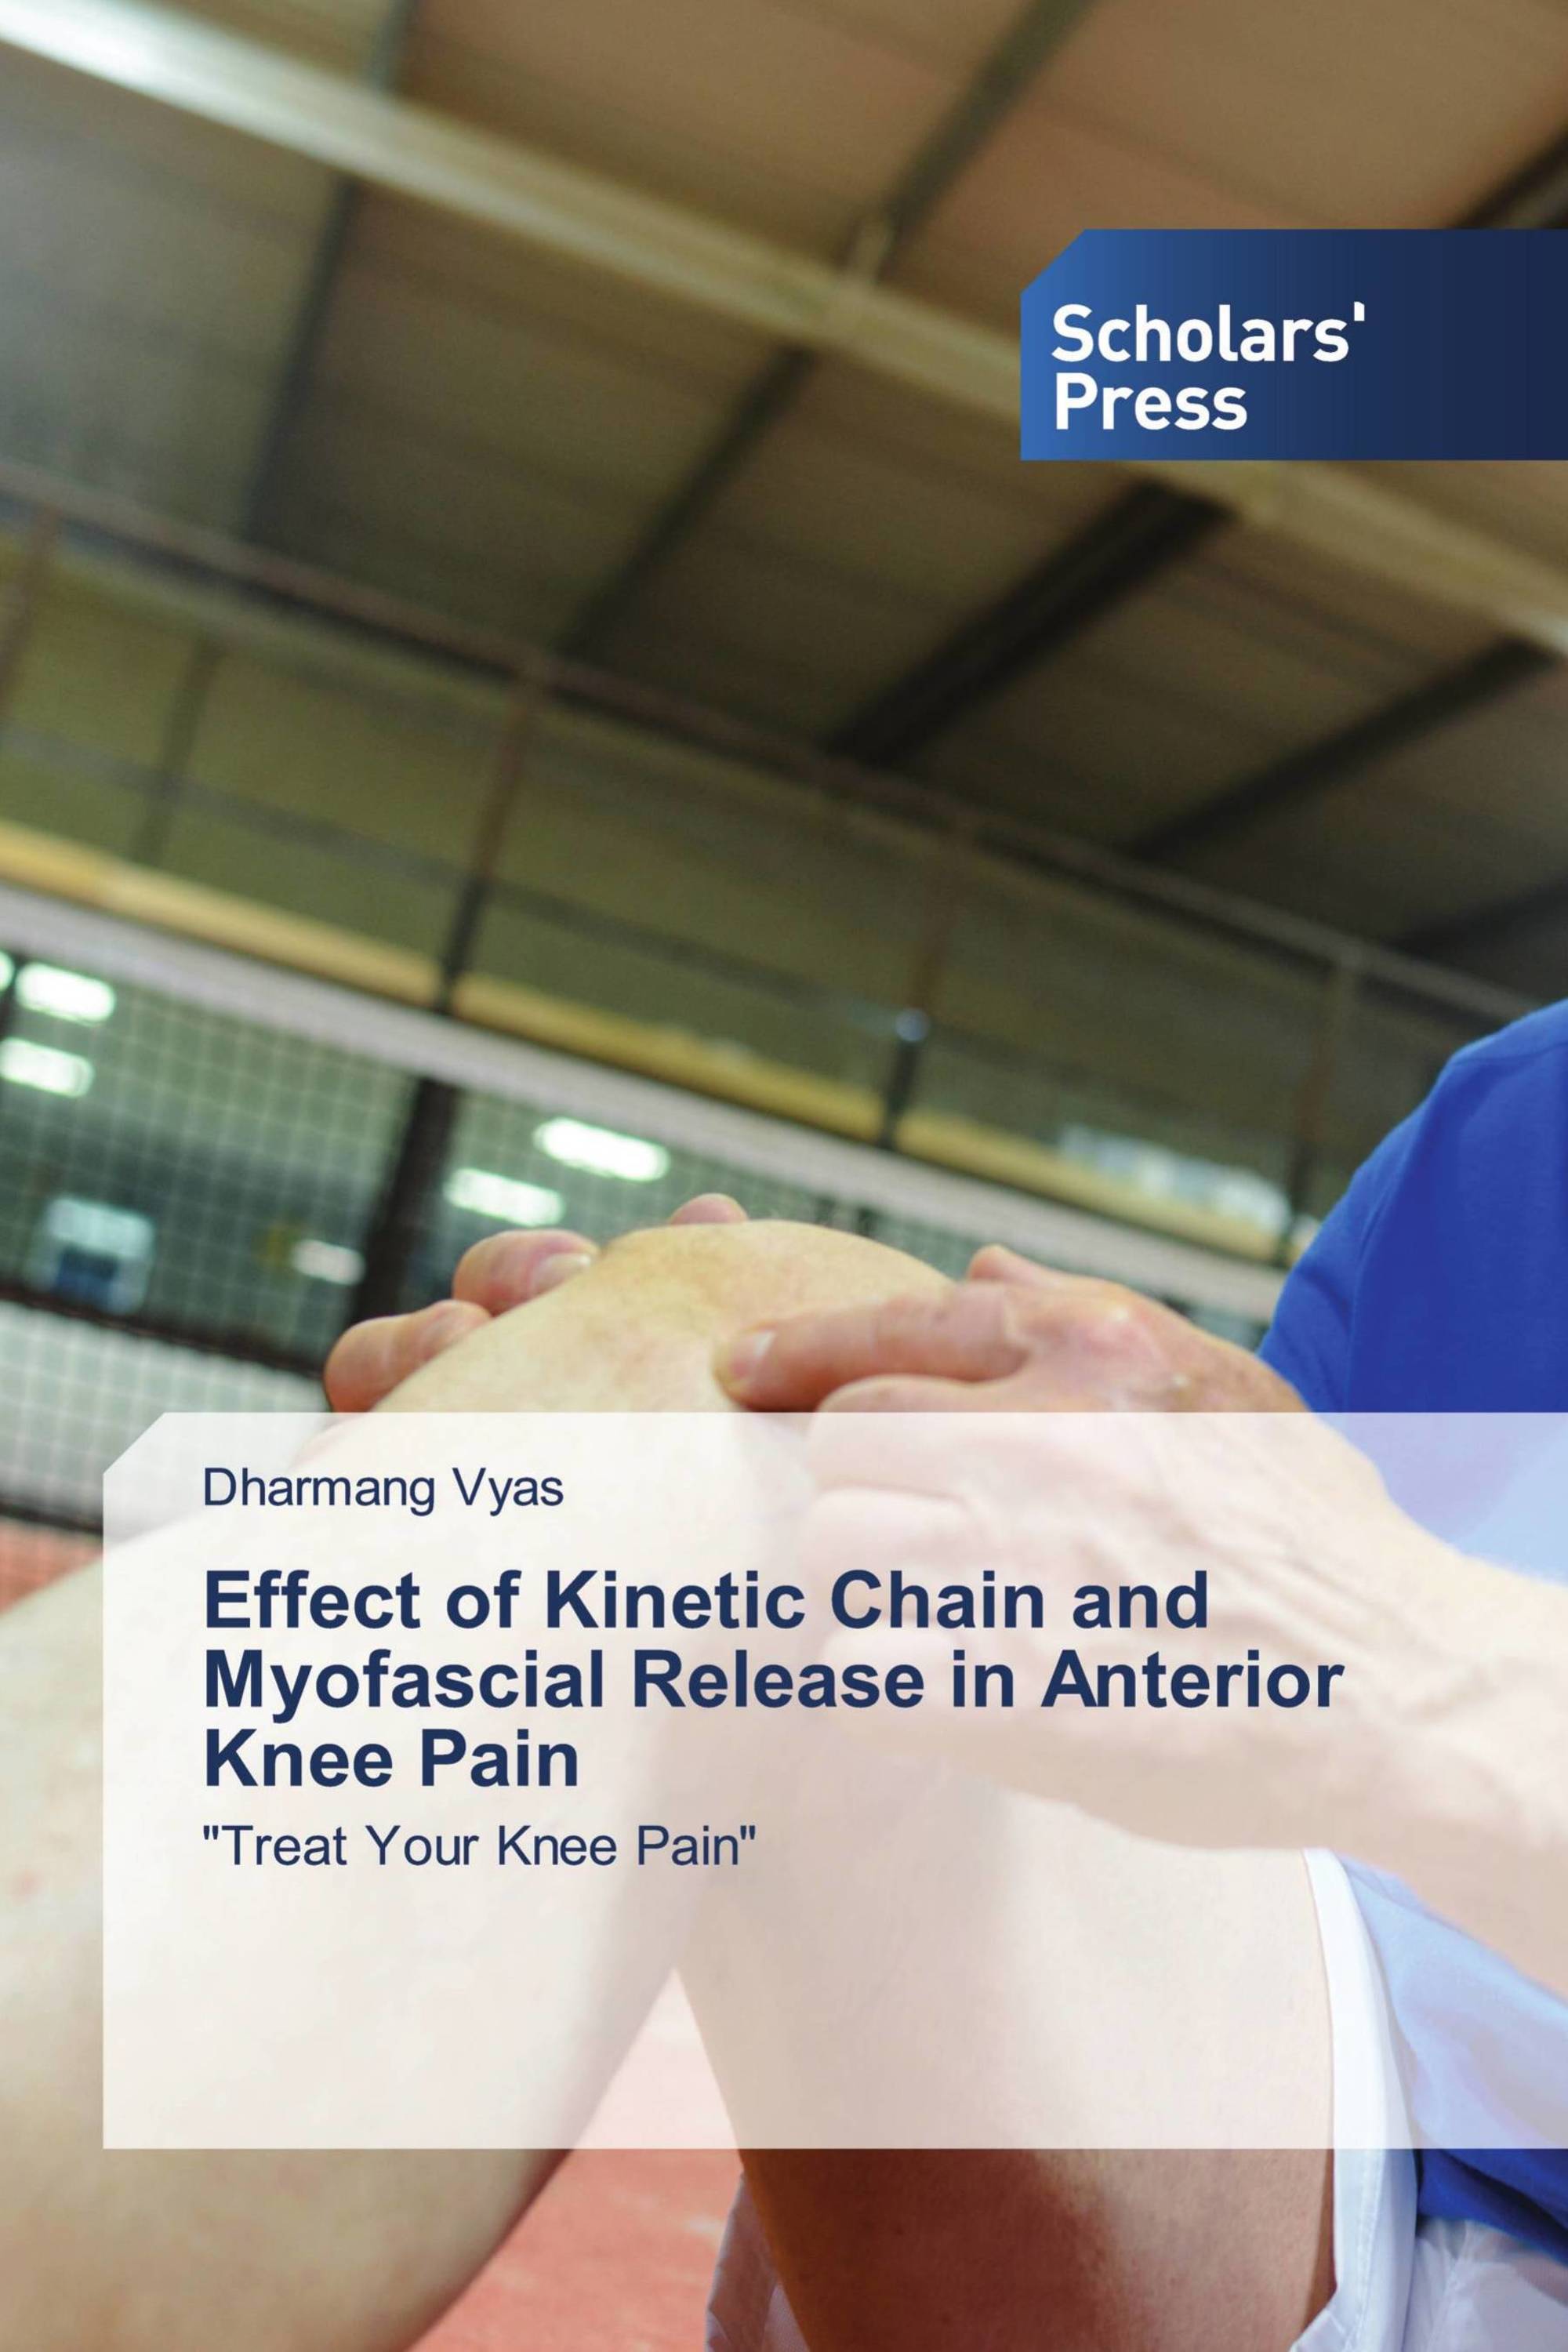 Effect of Kinetic Chain and Myofascial Release in Anterior Knee Pain